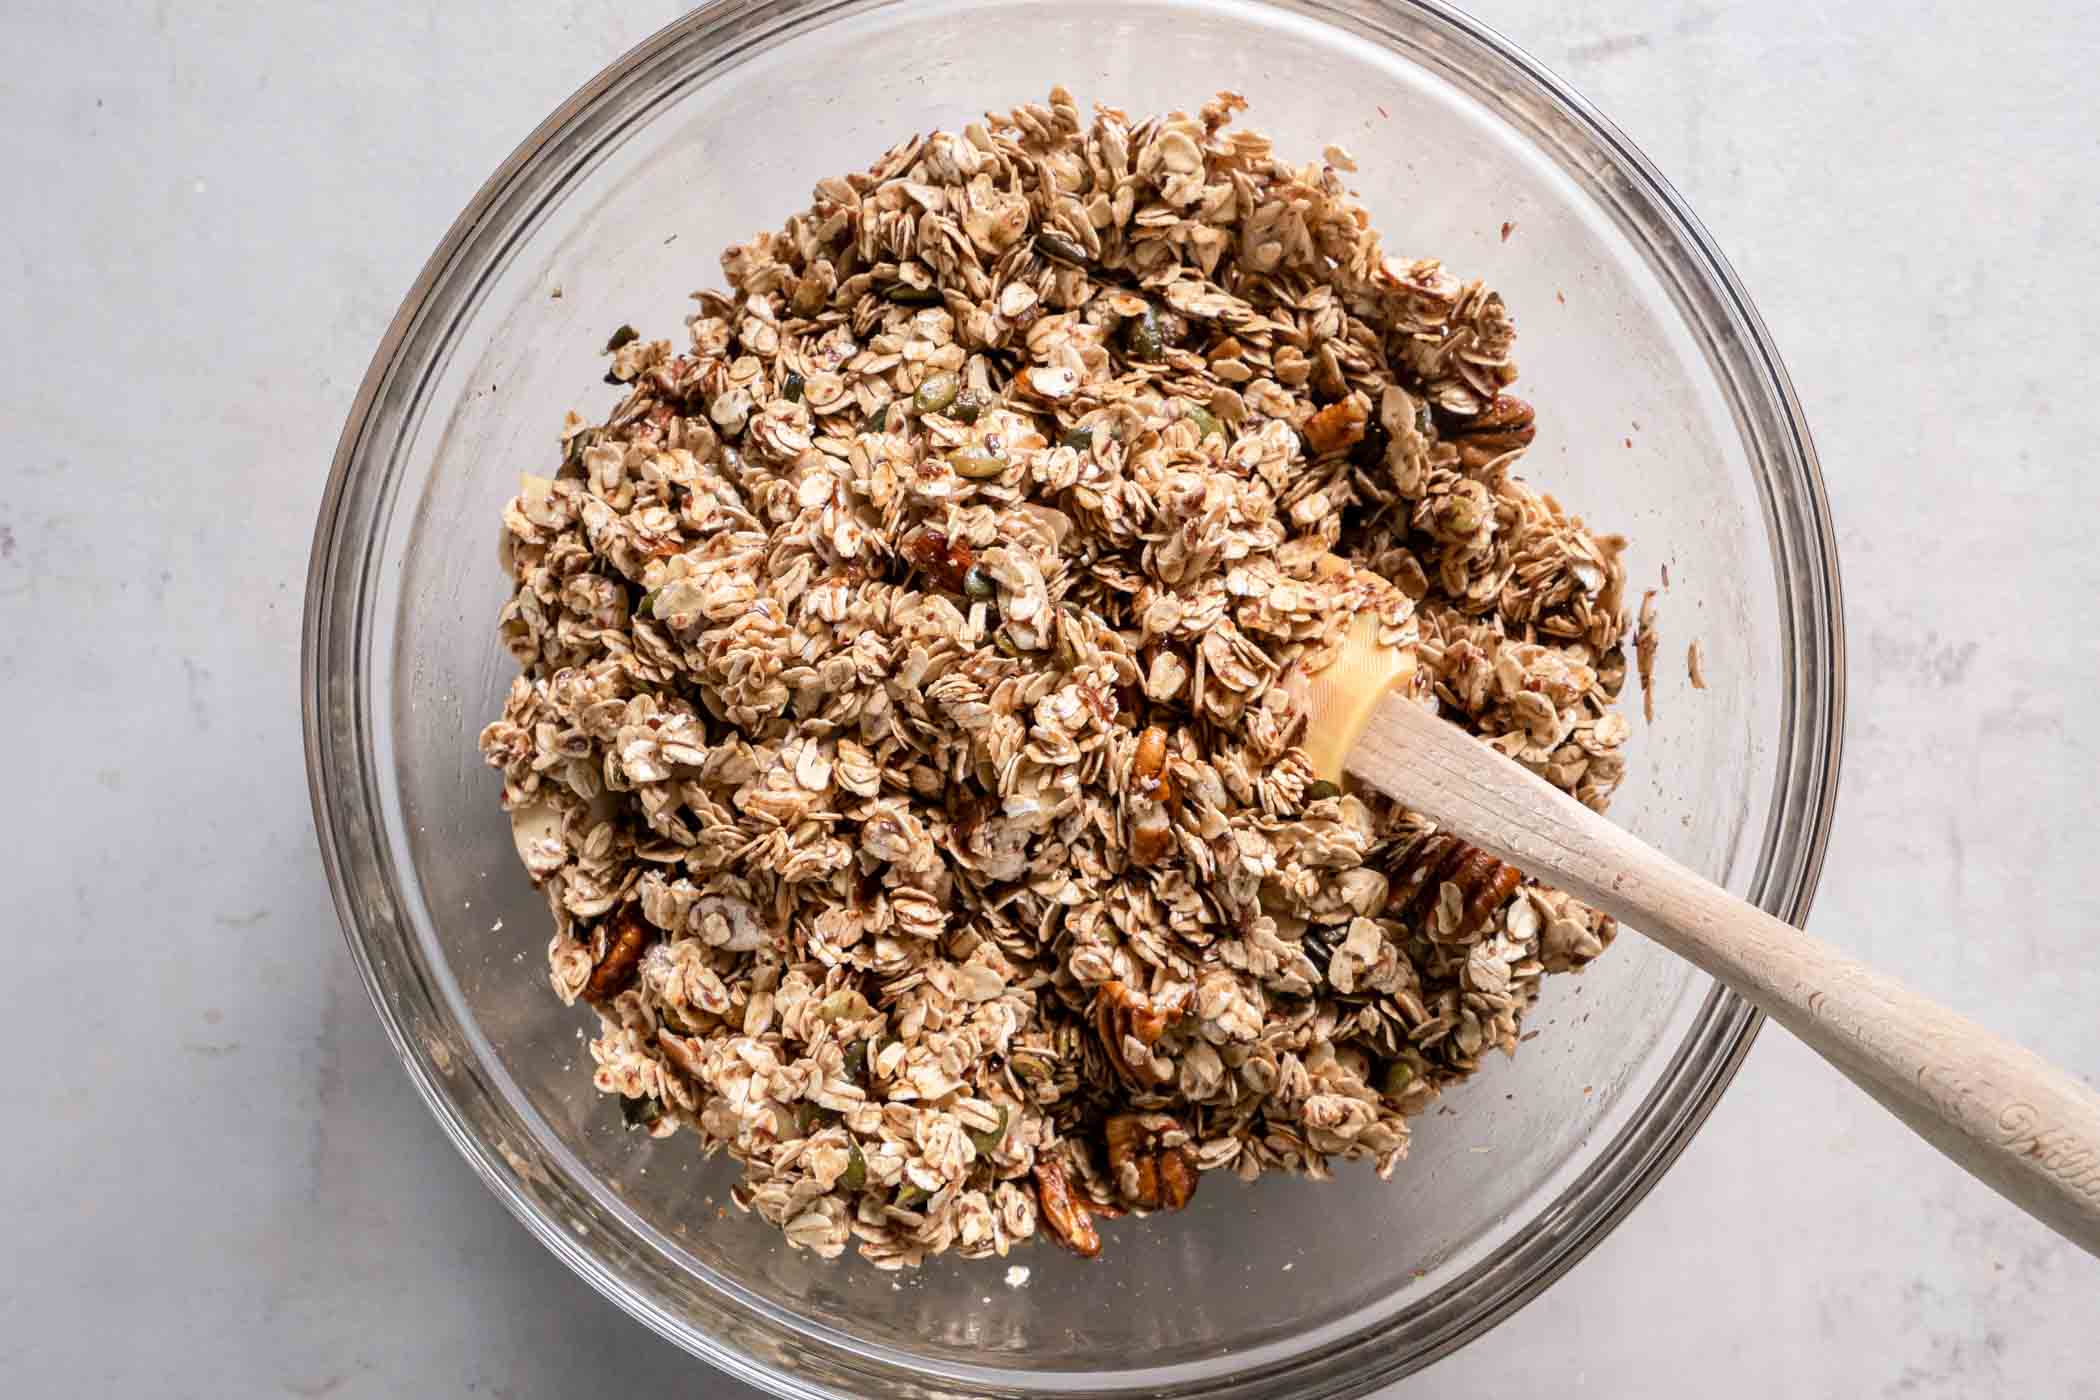 Granola in mixing bowl with a rubber spatula.